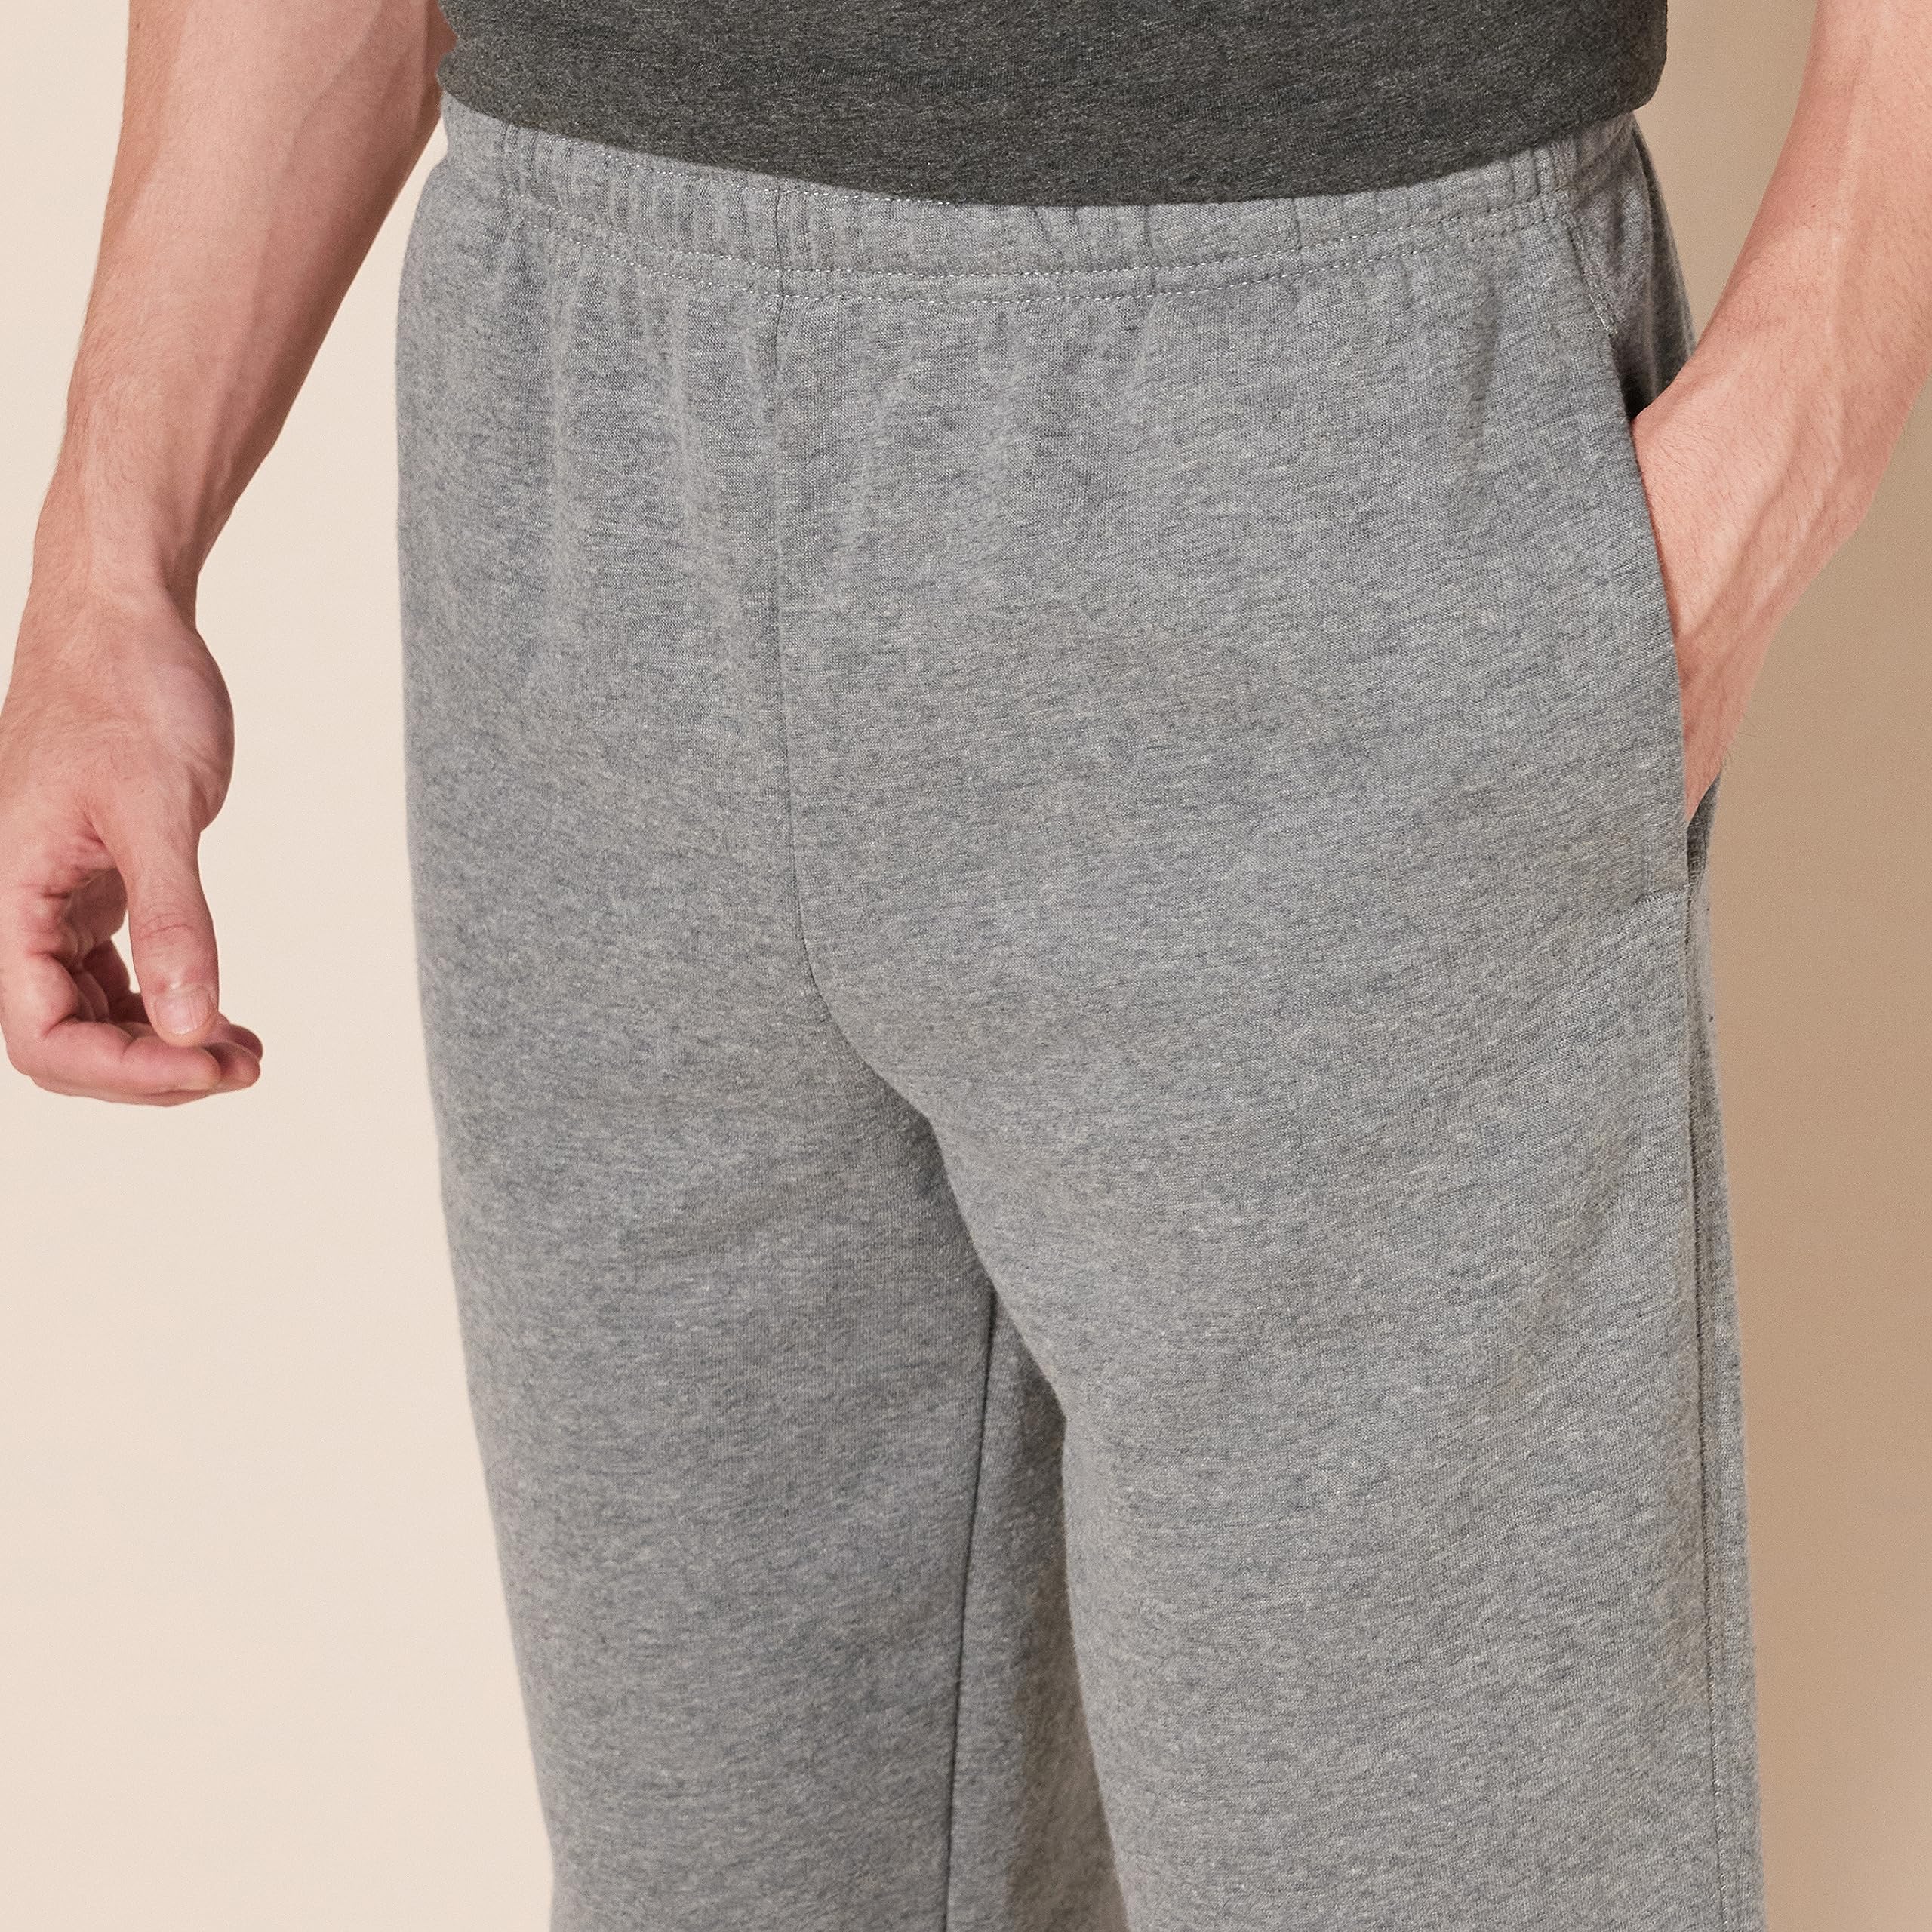 Amazon Essentials Men's Fleece Sweatpant (Available in Big & Tall), Light Grey Heather, Large